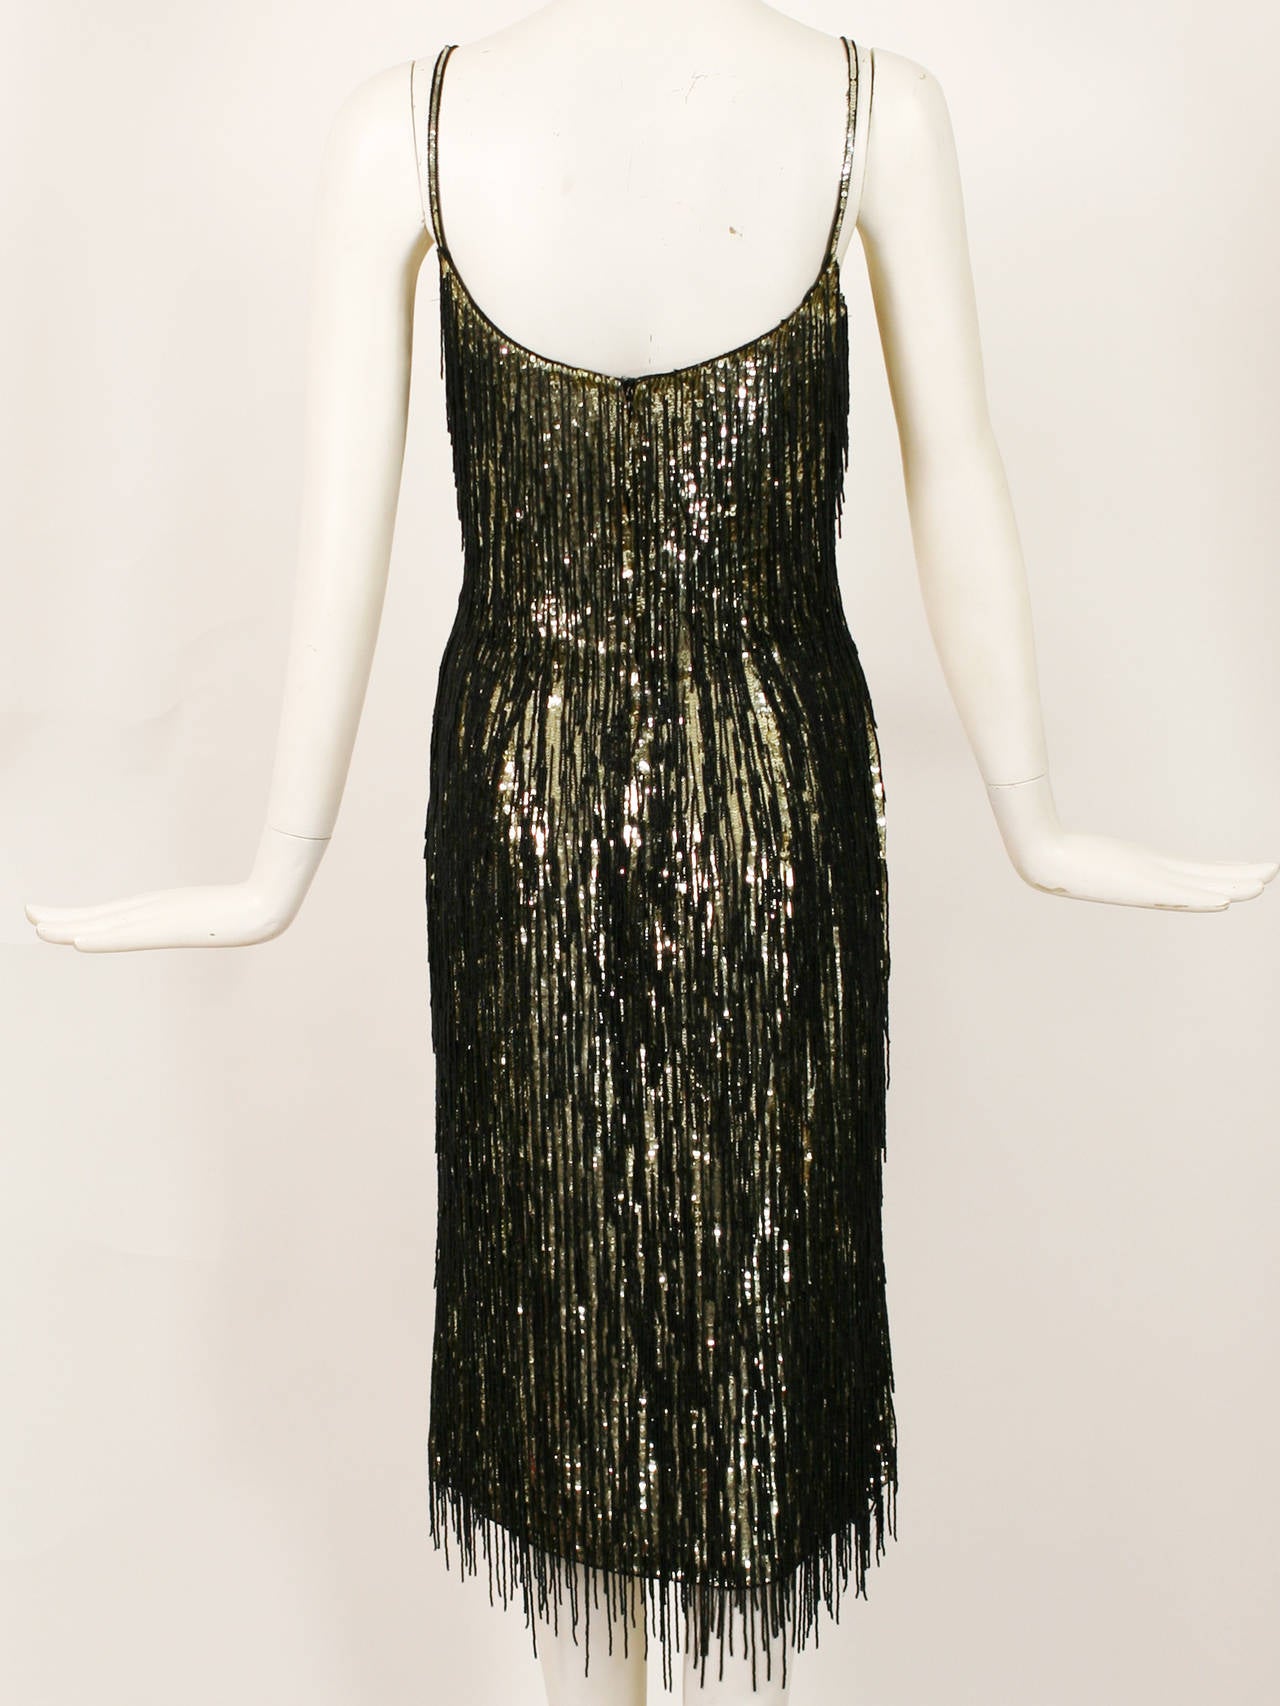 Women's Magnificent Escada Gold and Black Beaded Fringe Cocktail Dress For Sale